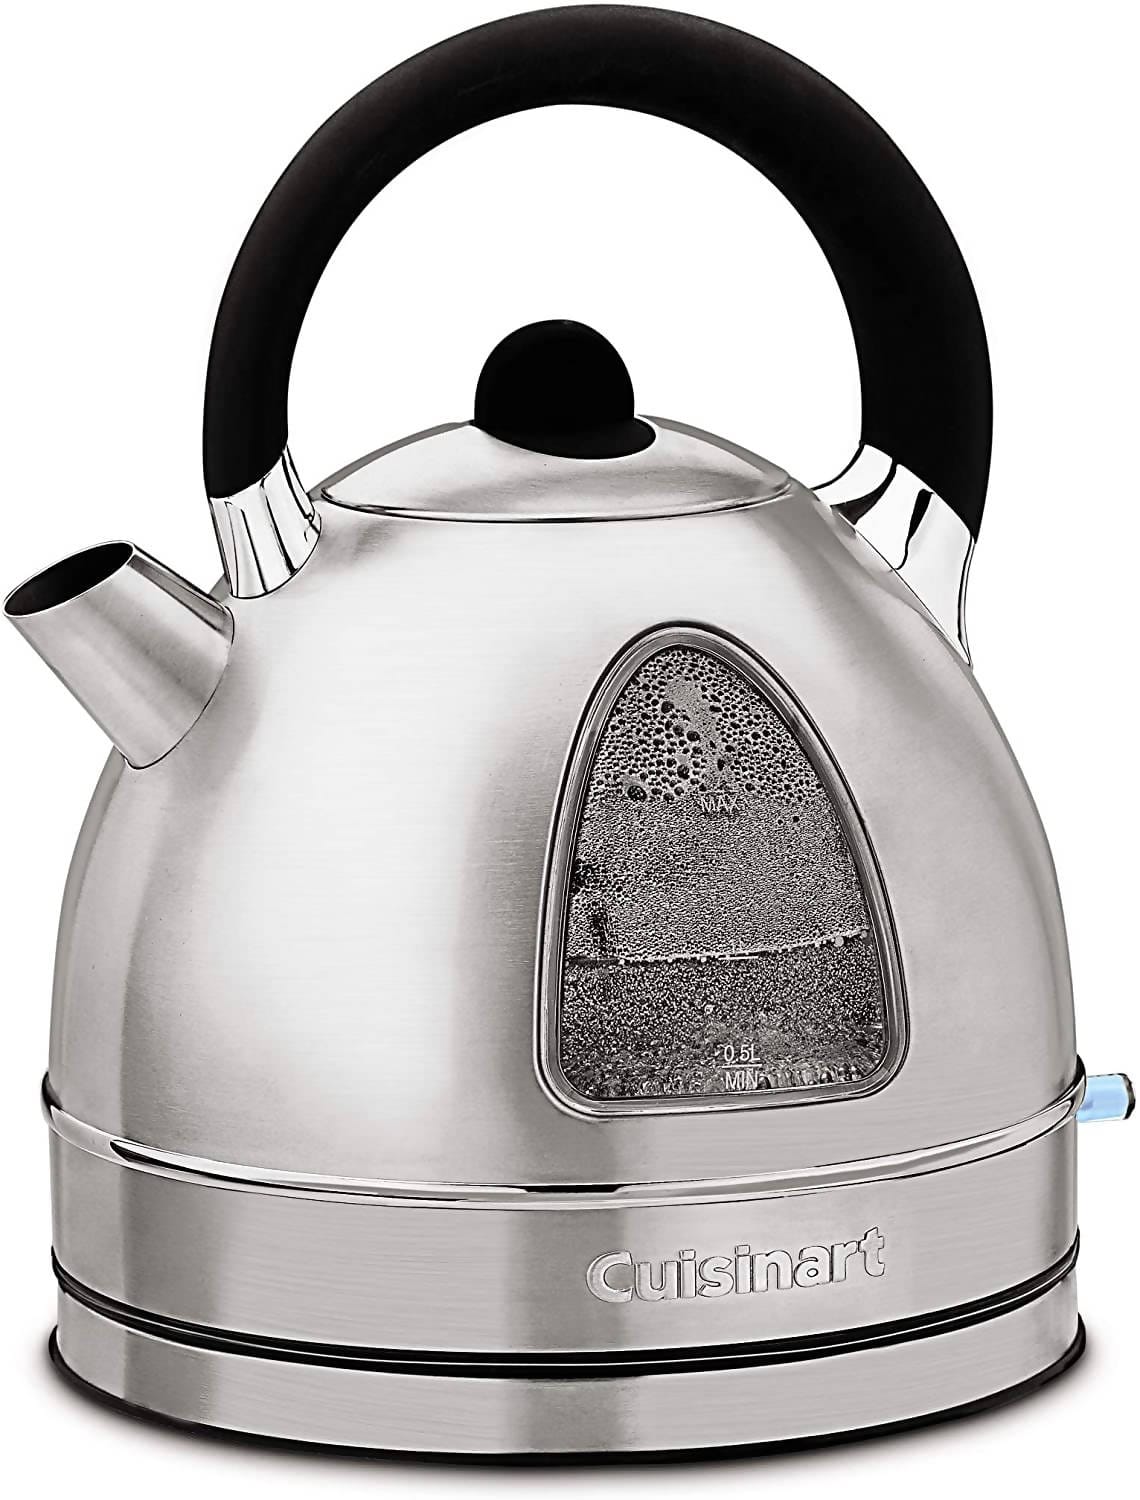 Cuisinart Cordless Stainless Steel Electric Kettle - CU-DK-17